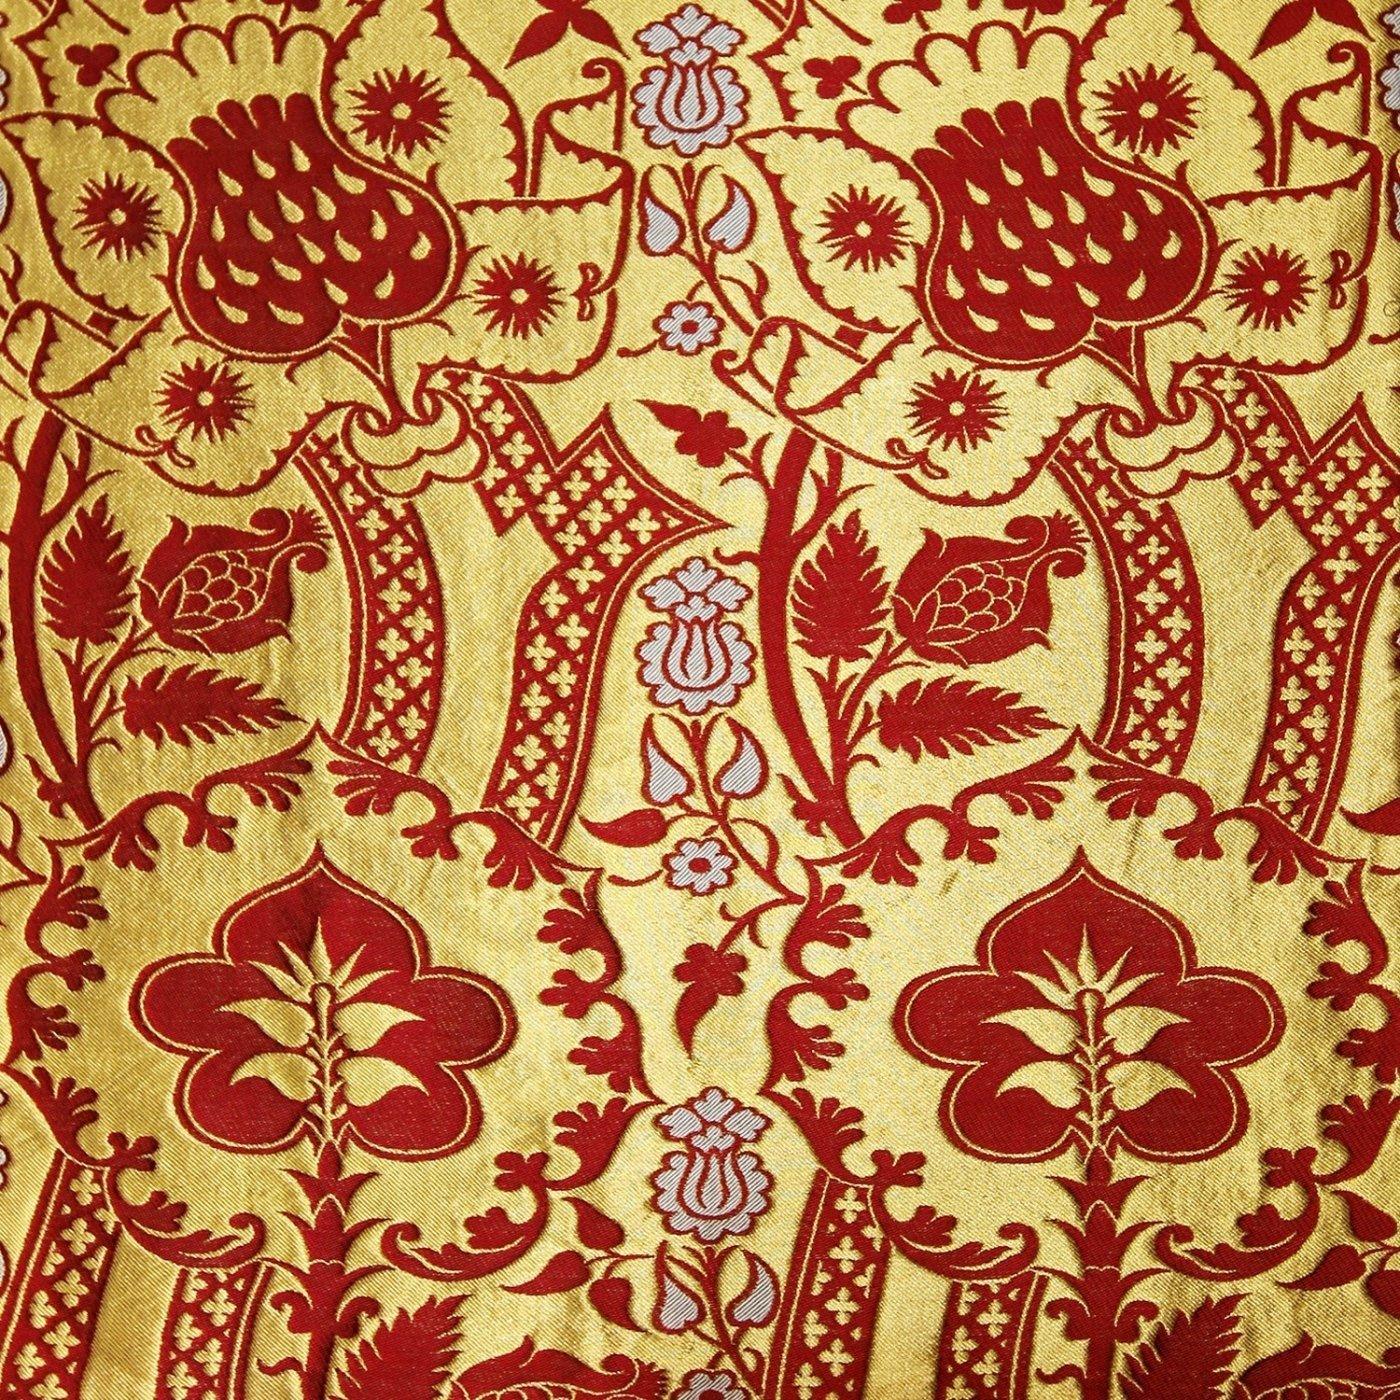 Embroidered Westminster Cope in Red/Gold/White Comper Strawberry - Watts & Co. (international)